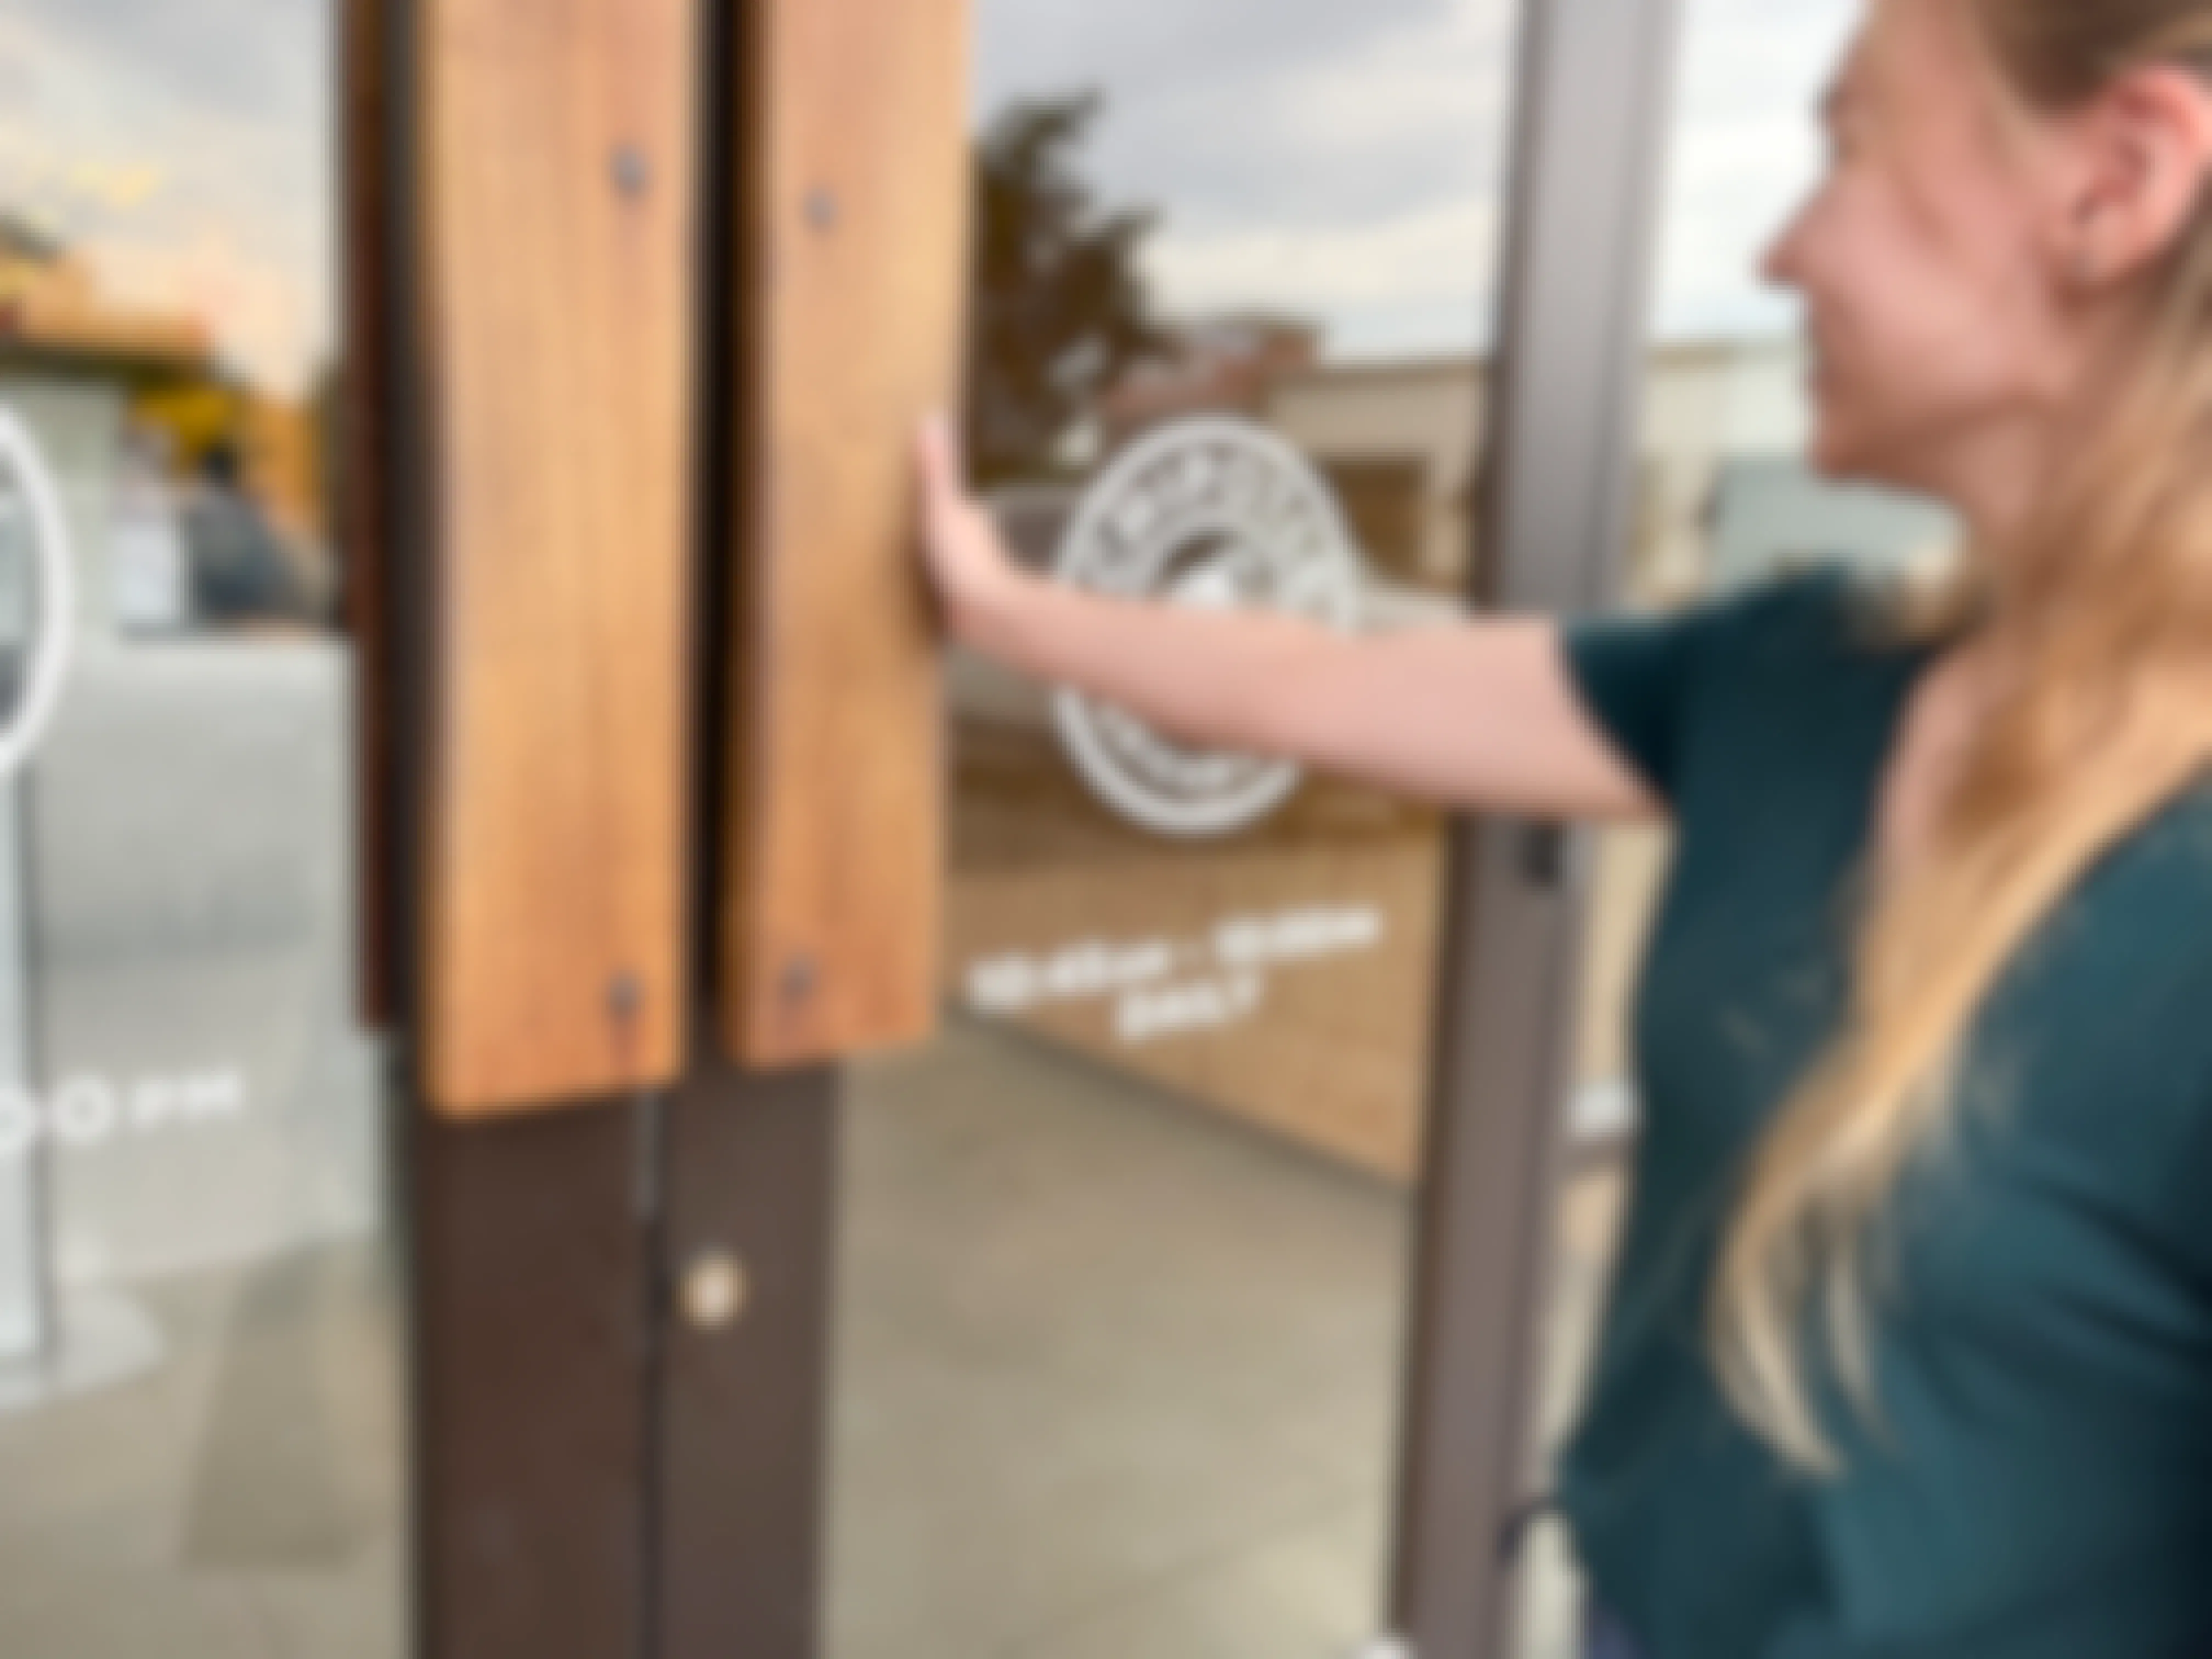 A woman opening the door to enter a Chipotle restaurant.